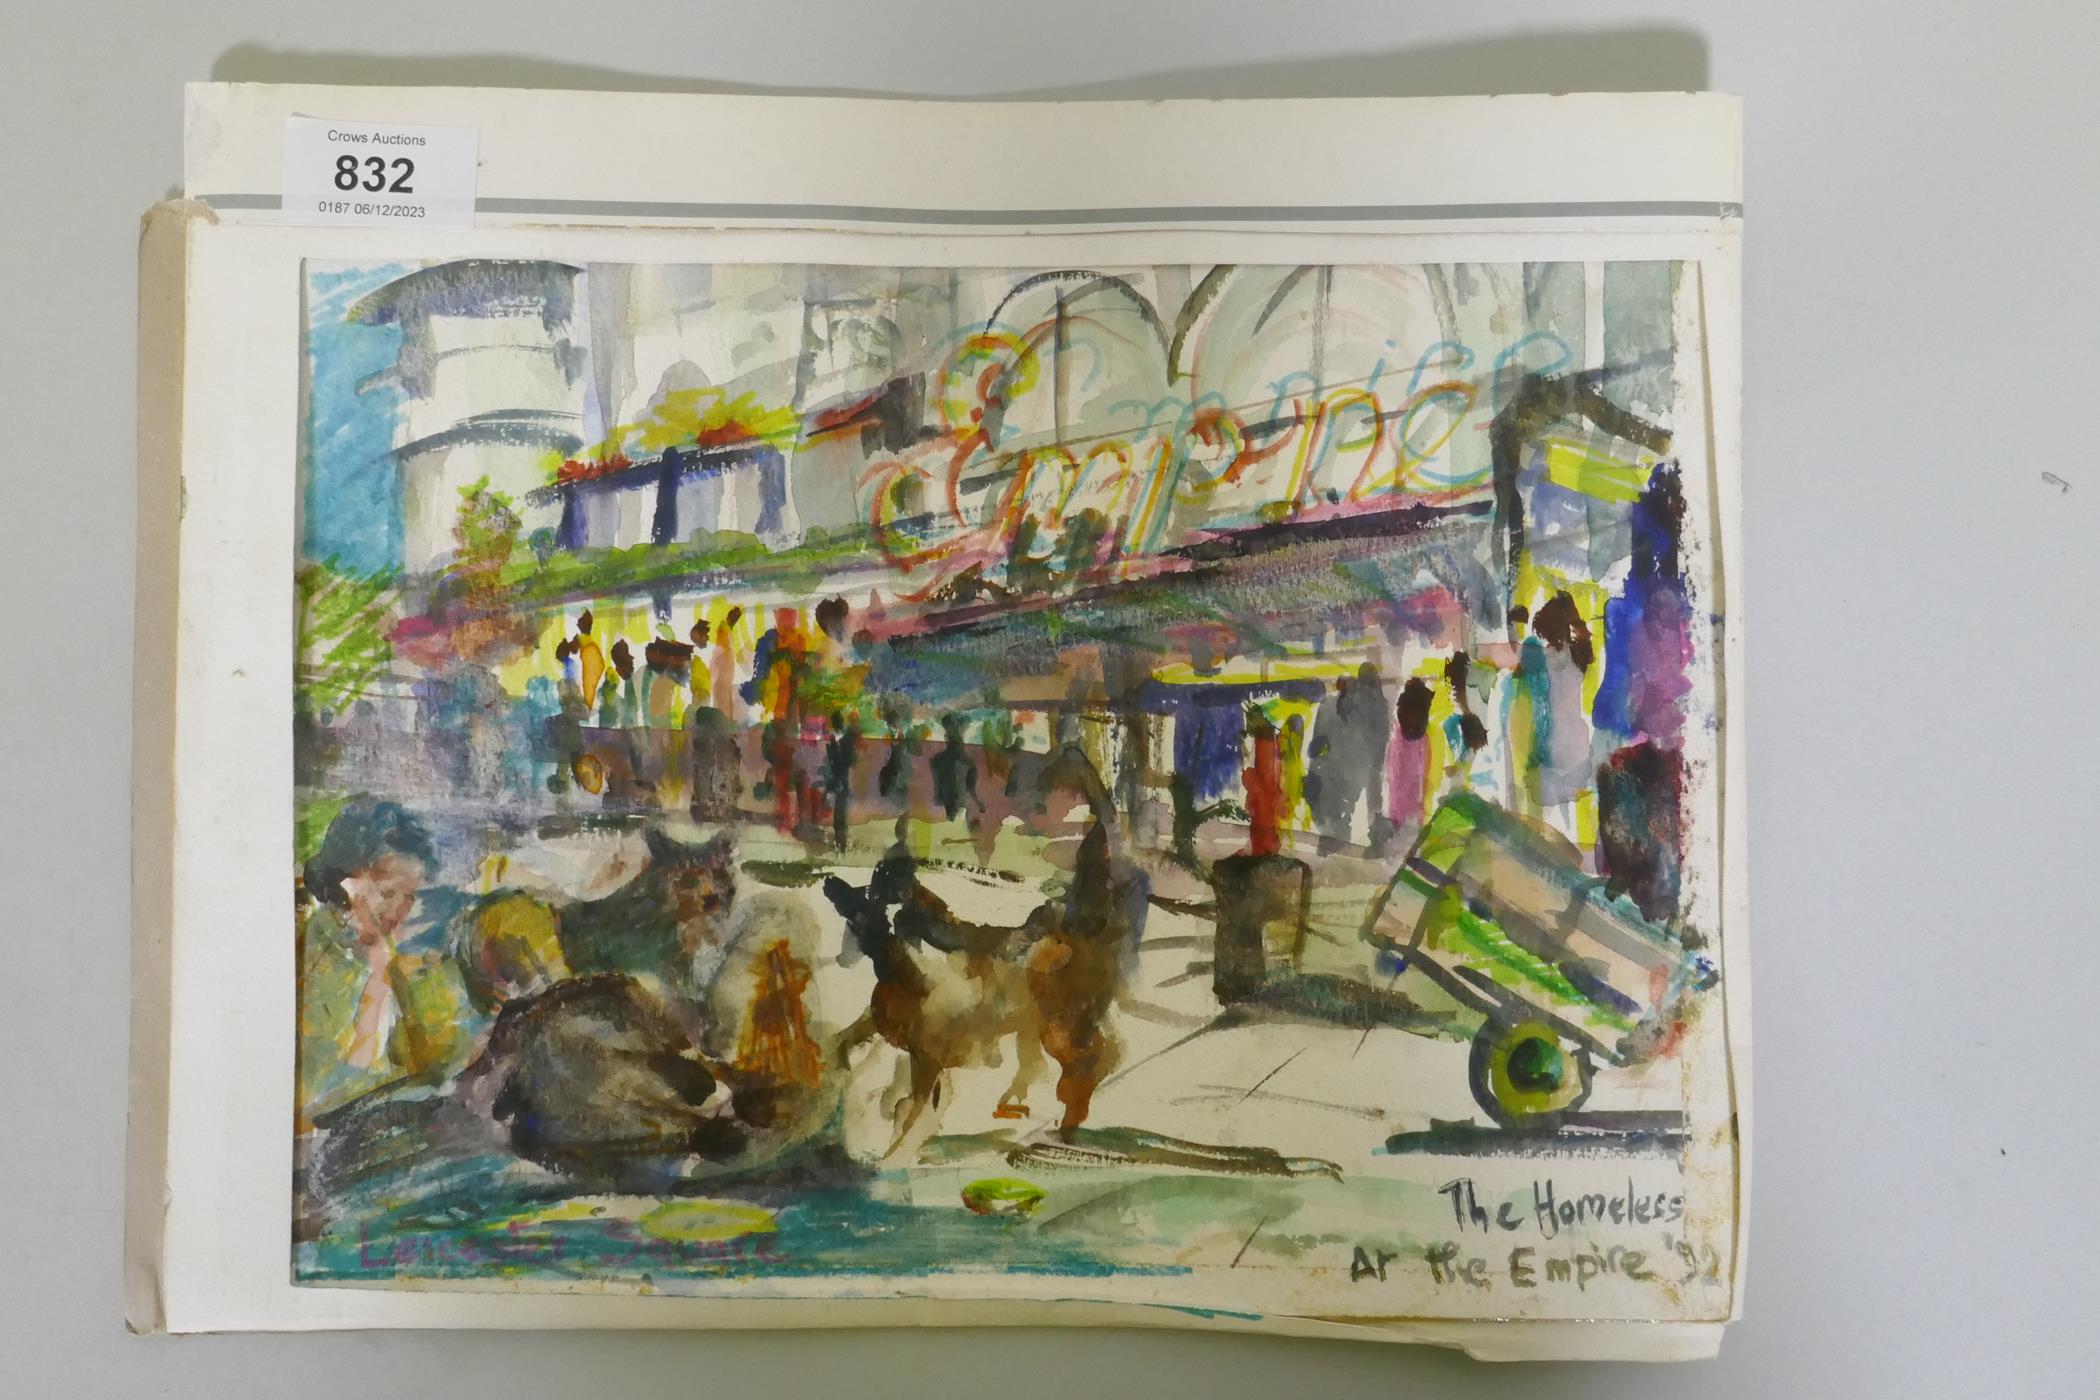 Leicester Square, The Homeless at the Empire '92, unsigned, watercolour, 20 x 28cm - Image 2 of 2